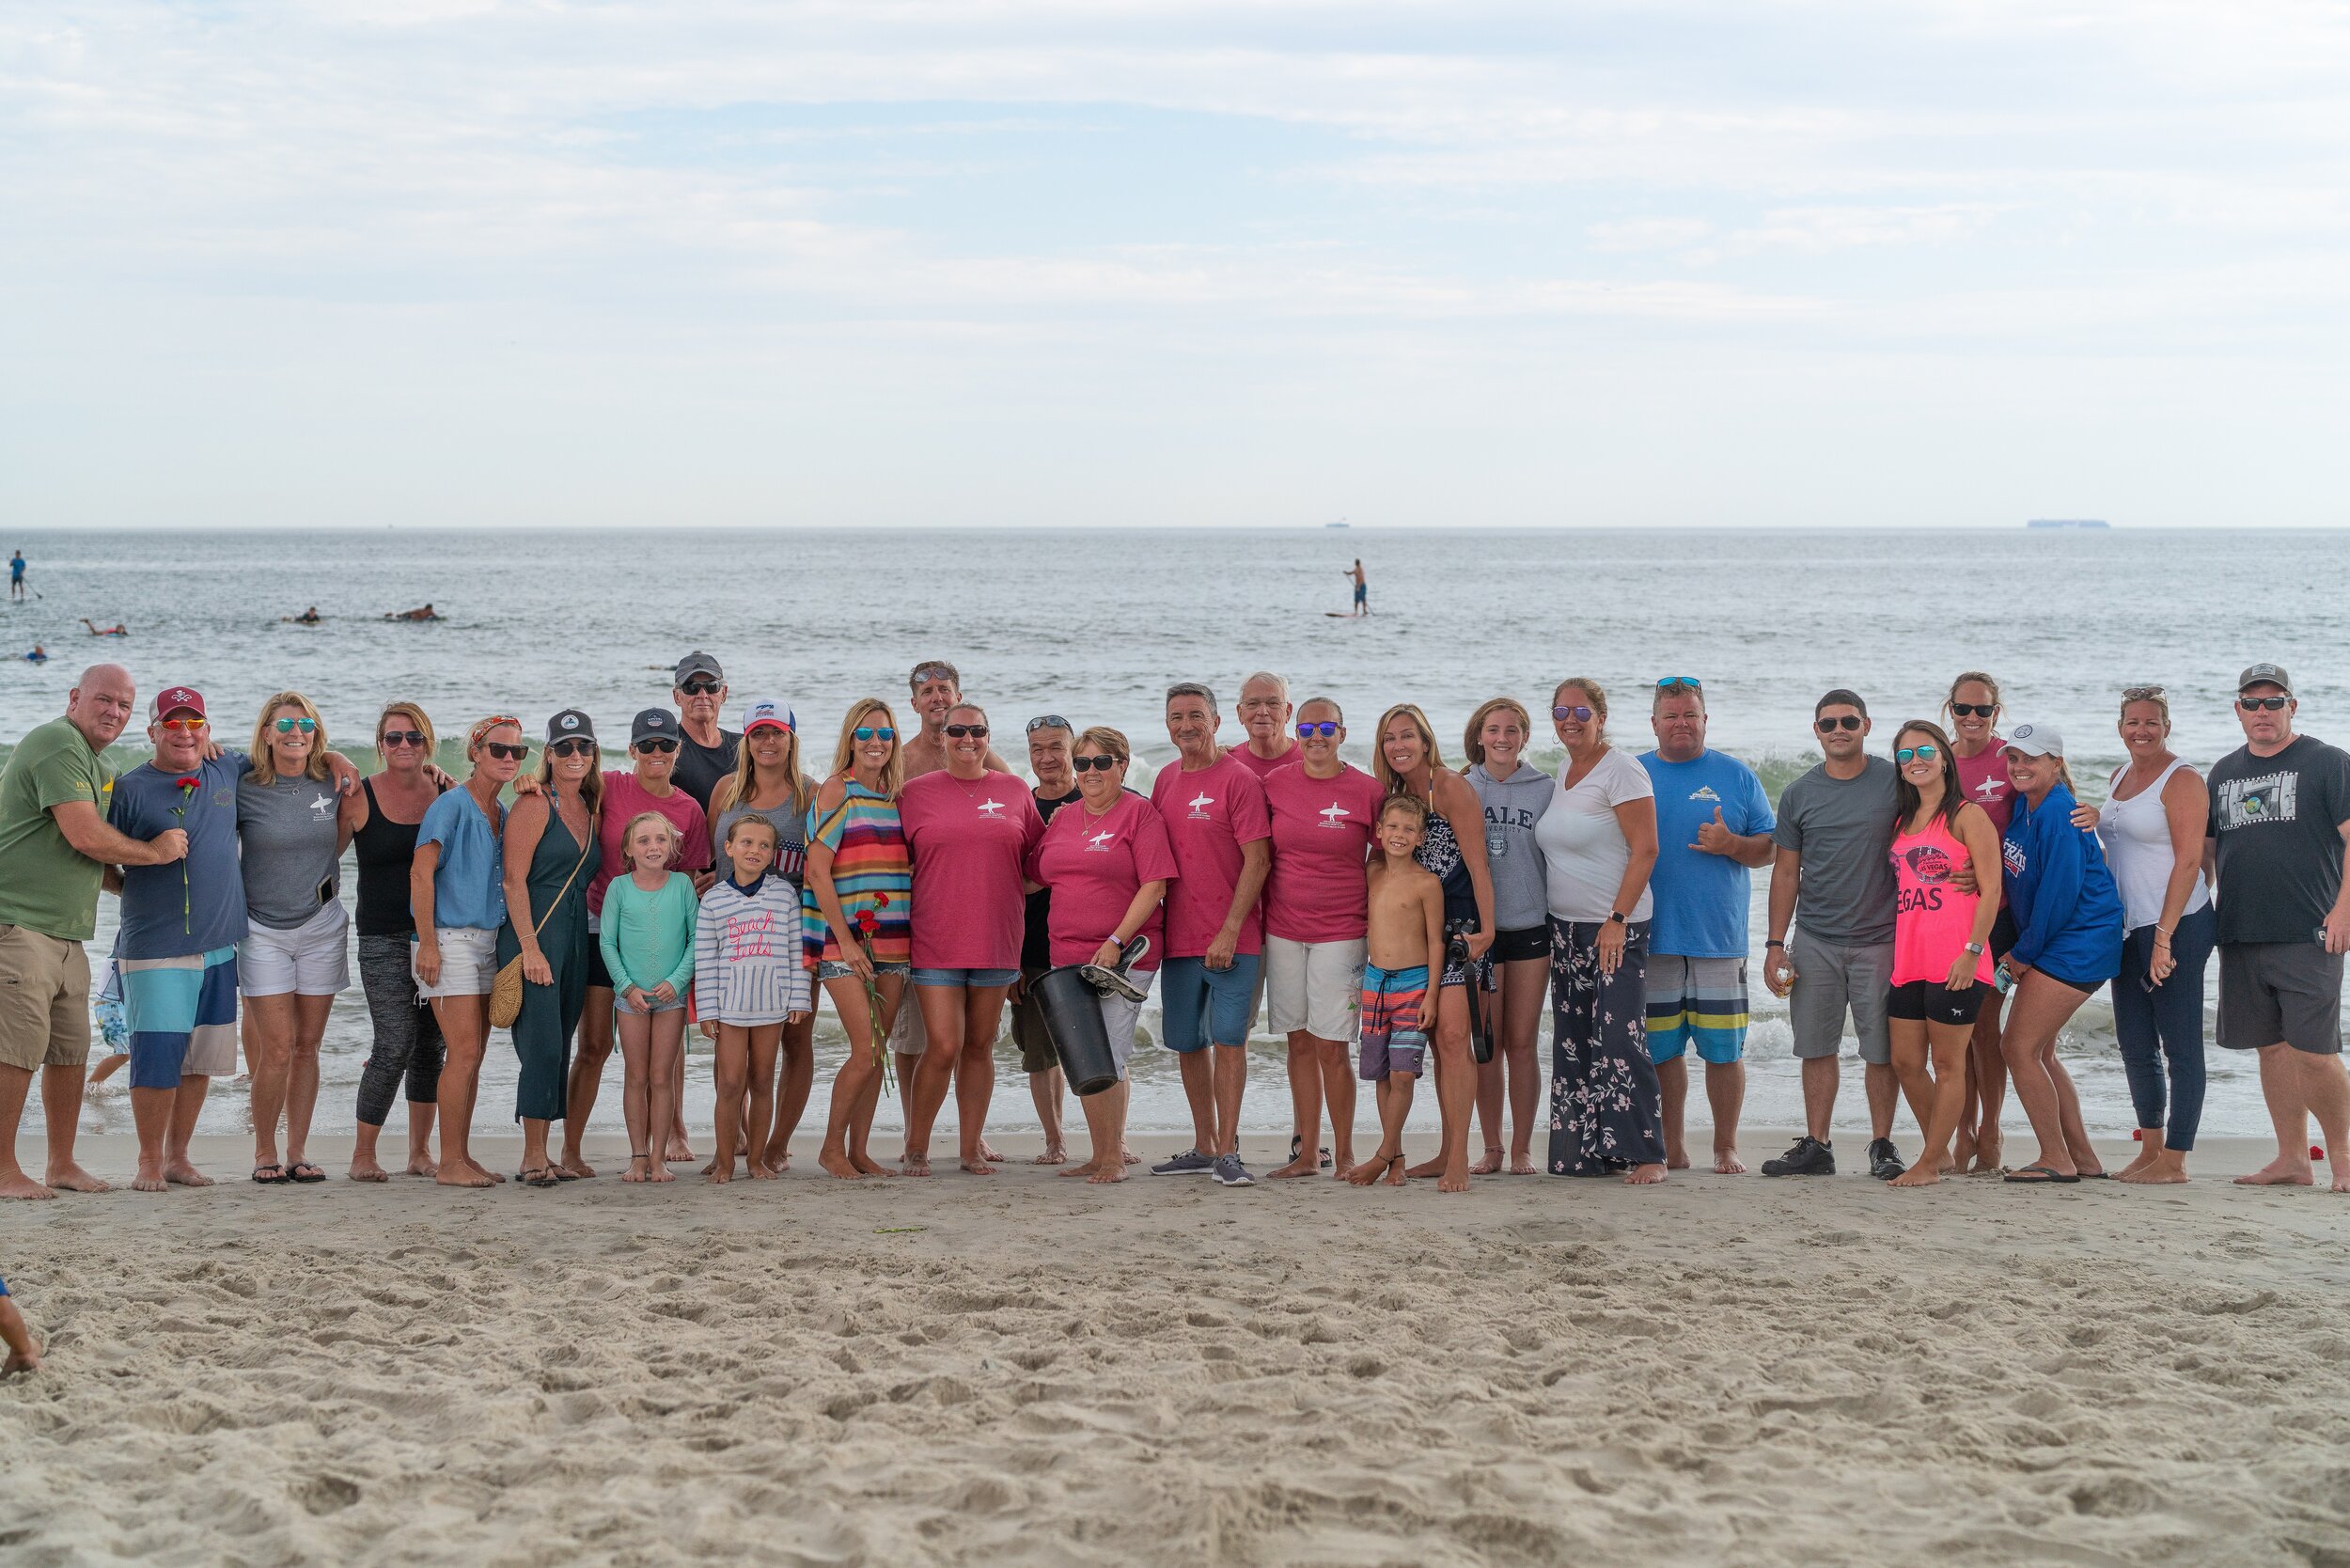   The extended Allen family gathers for a group photo at the end of the 15th Annual Richie Allen Memorial Surf Classic.  